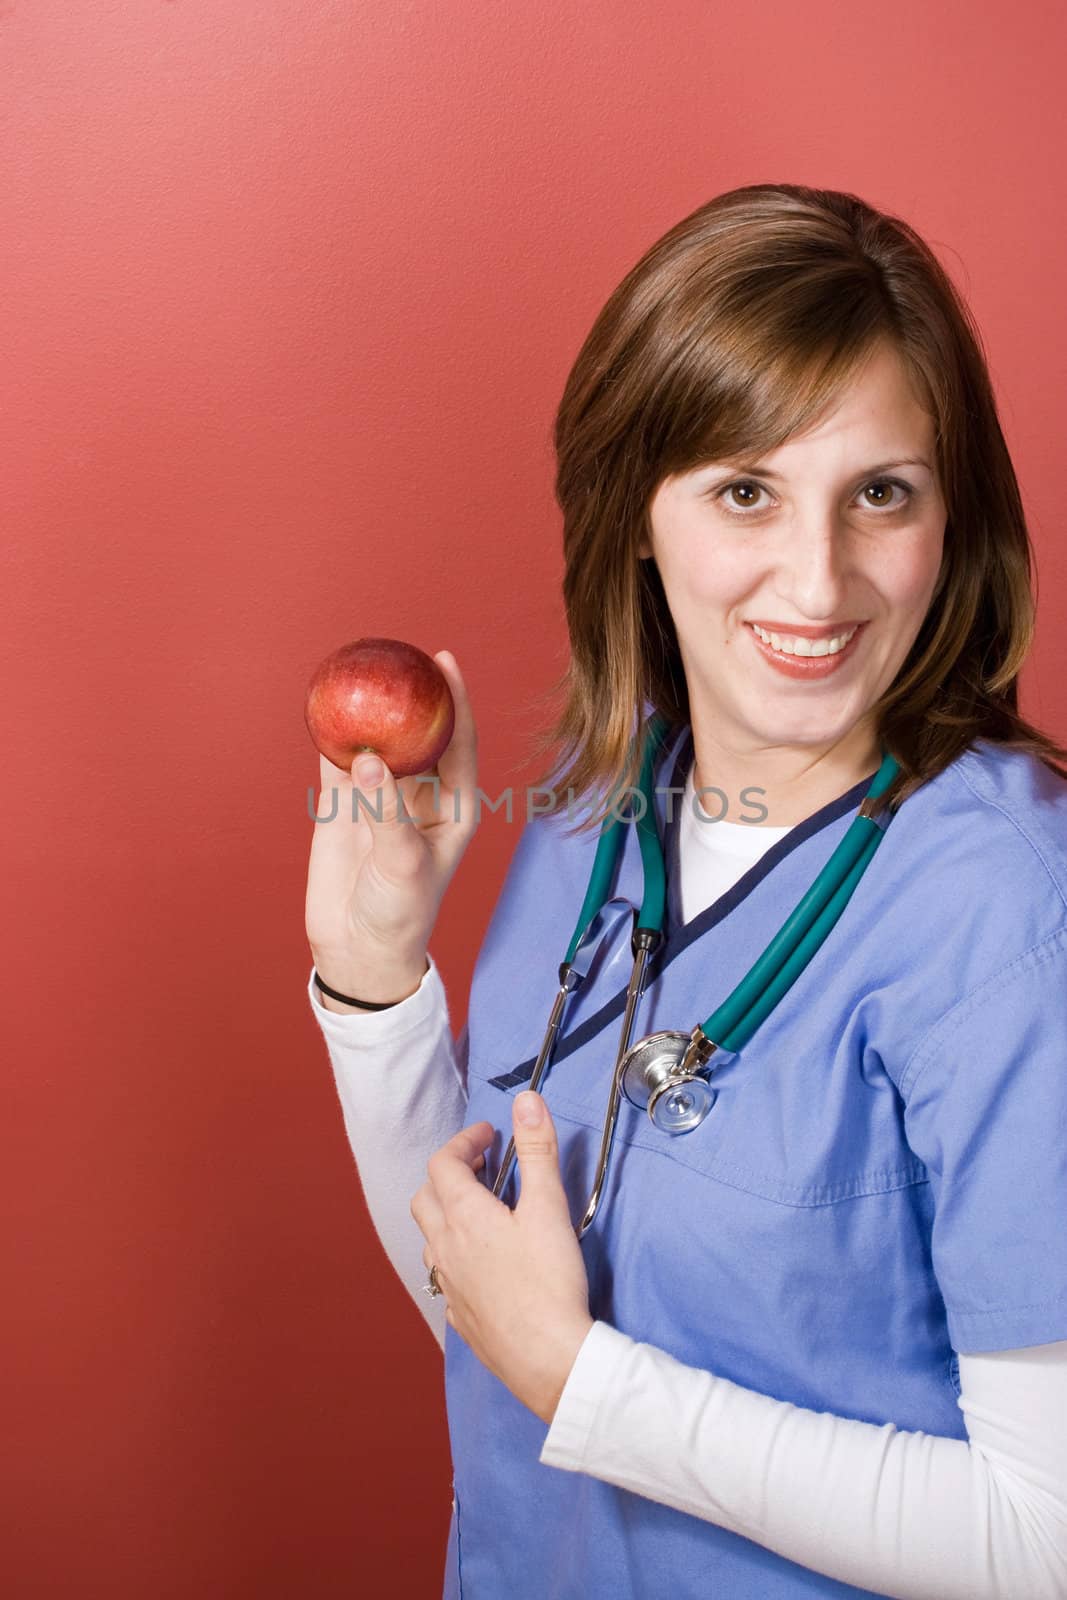 A young nurse is holding up an apple.  An apple a day keeps the doctor away.